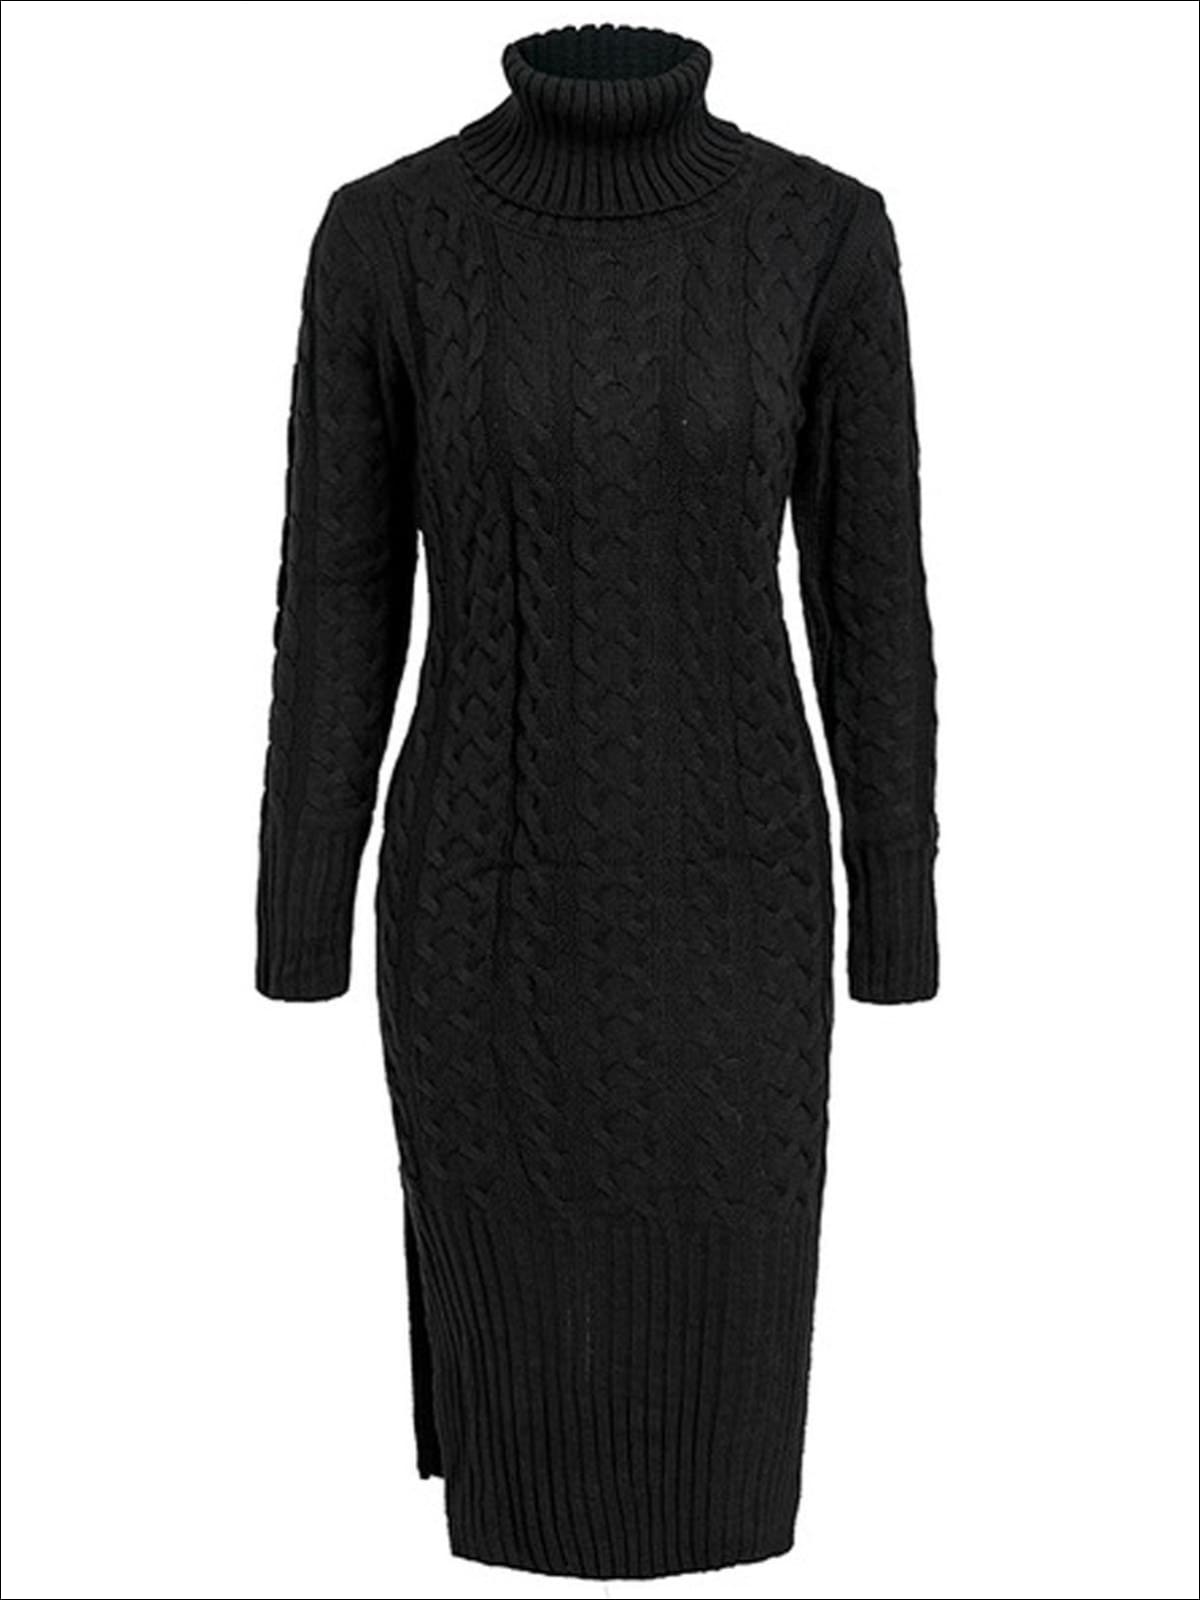 Womens Fall Cable Knit Turtleneck Sweater Dress - Black / One Size - Womens Fall Dresses